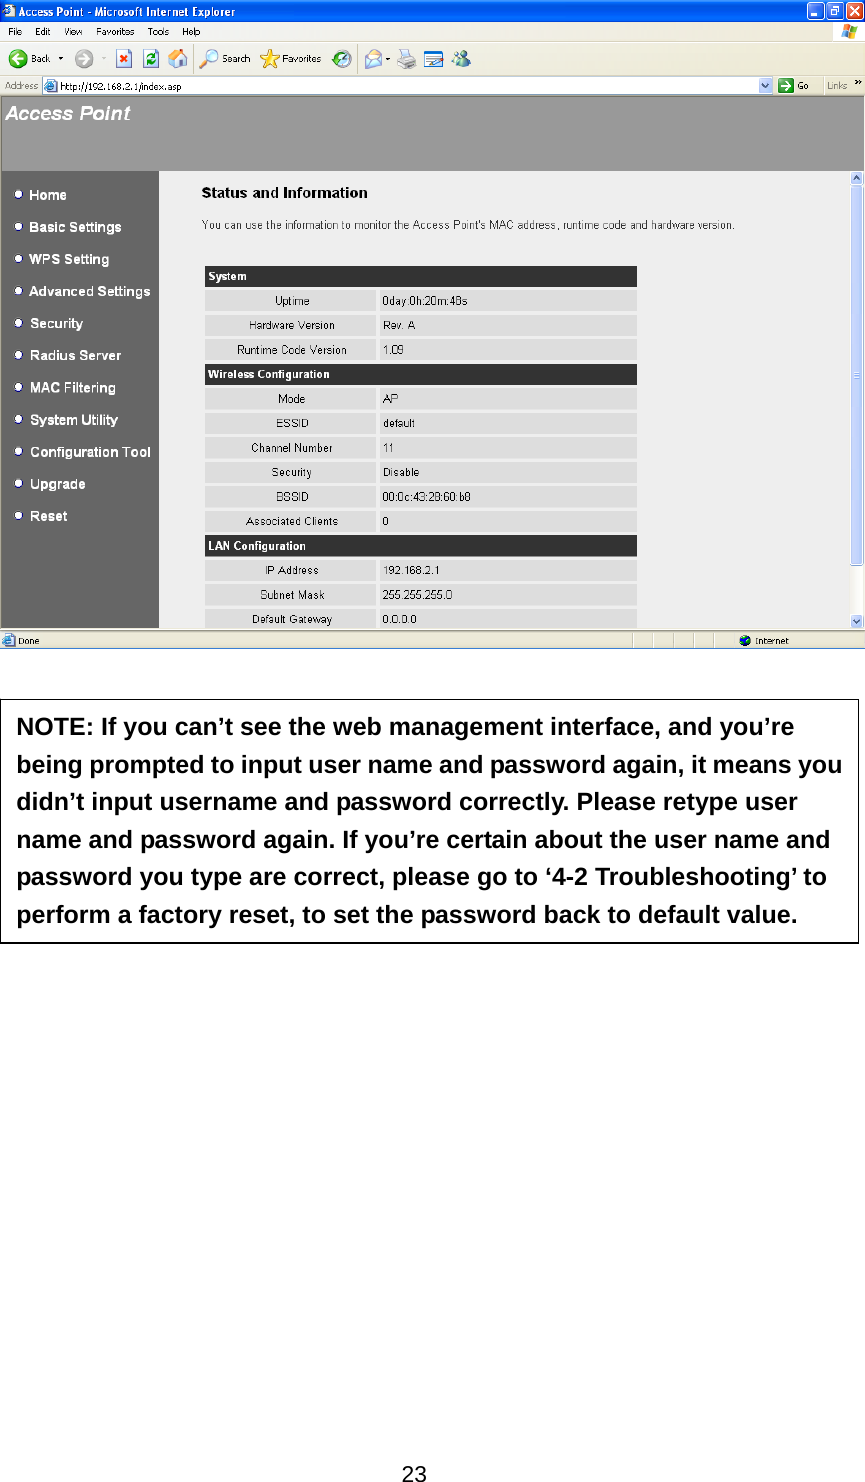 23                 NOTE: If you can’t see the web management interface, and you’re being prompted to input user name and password again, it means you didn’t input username and password correctly. Please retype user name and password again. If you’re certain about the user name and password you type are correct, please go to ‘4-2 Troubleshooting’ to perform a factory reset, to set the password back to default value. 